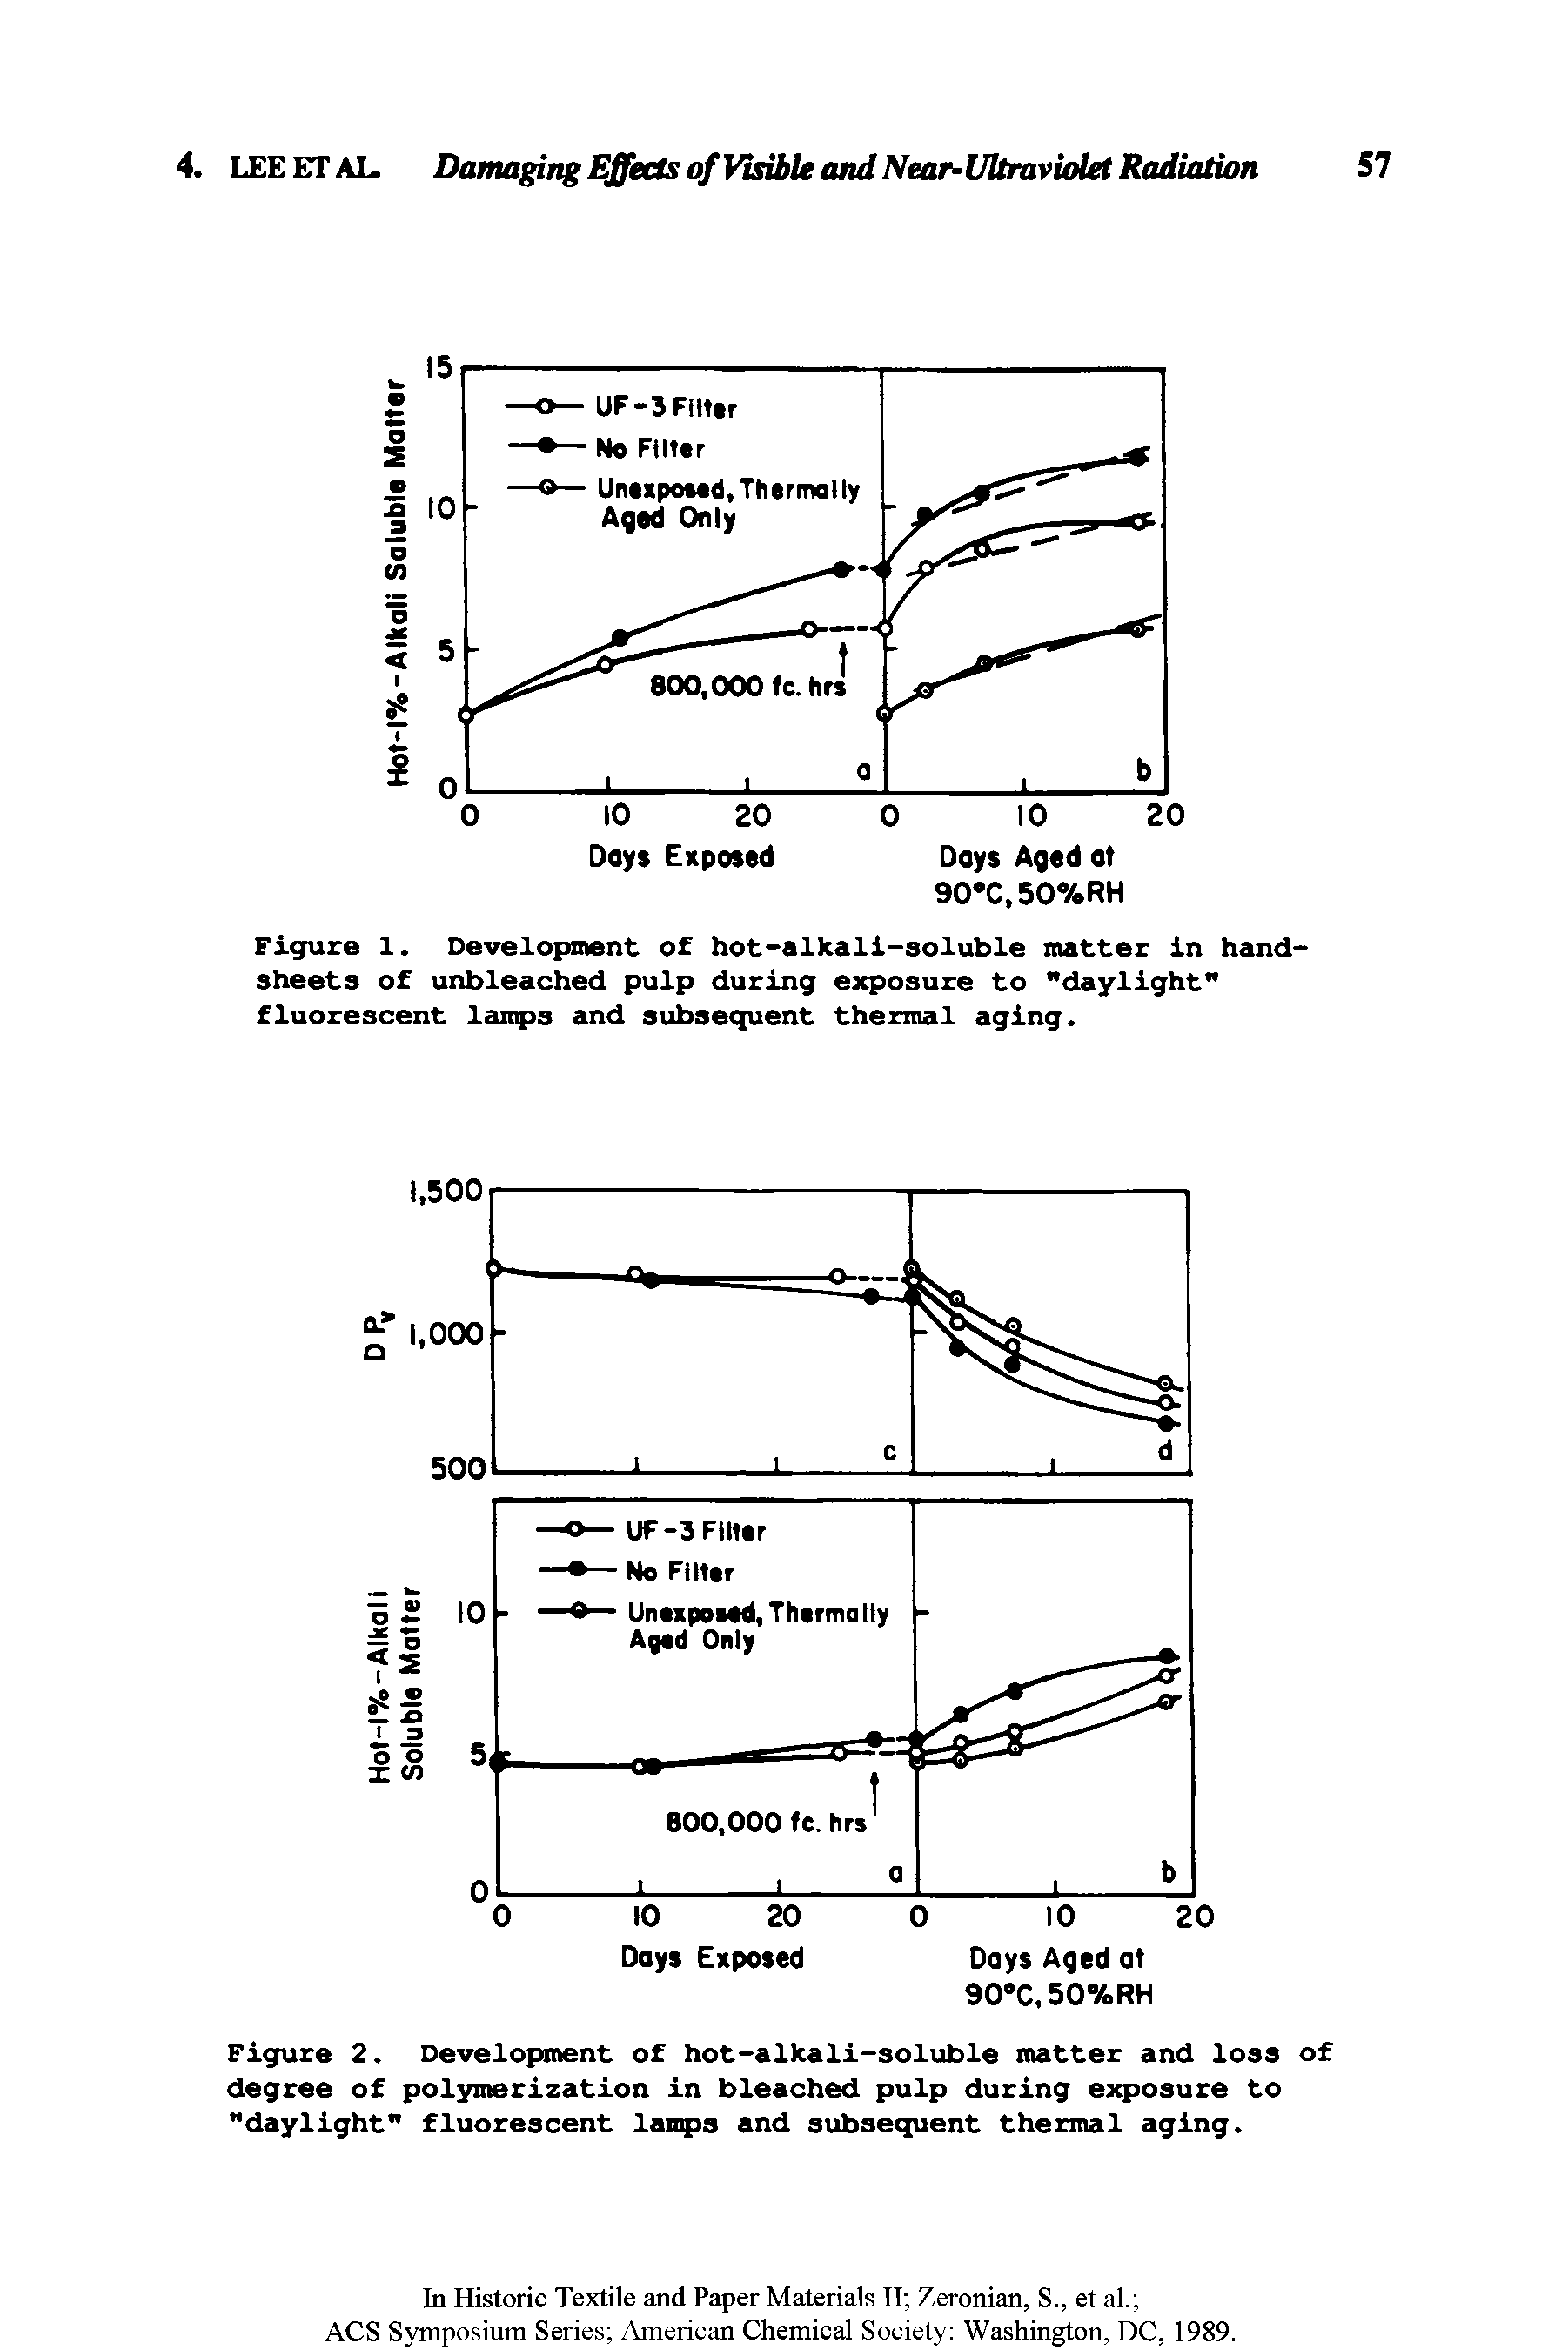 Figure 2. Development of hot-alkali-soluble matter and loss of degree of polymerization in bleached pulp during exposure to "daylight" fluorescent lamps and subsequent thermal aging.